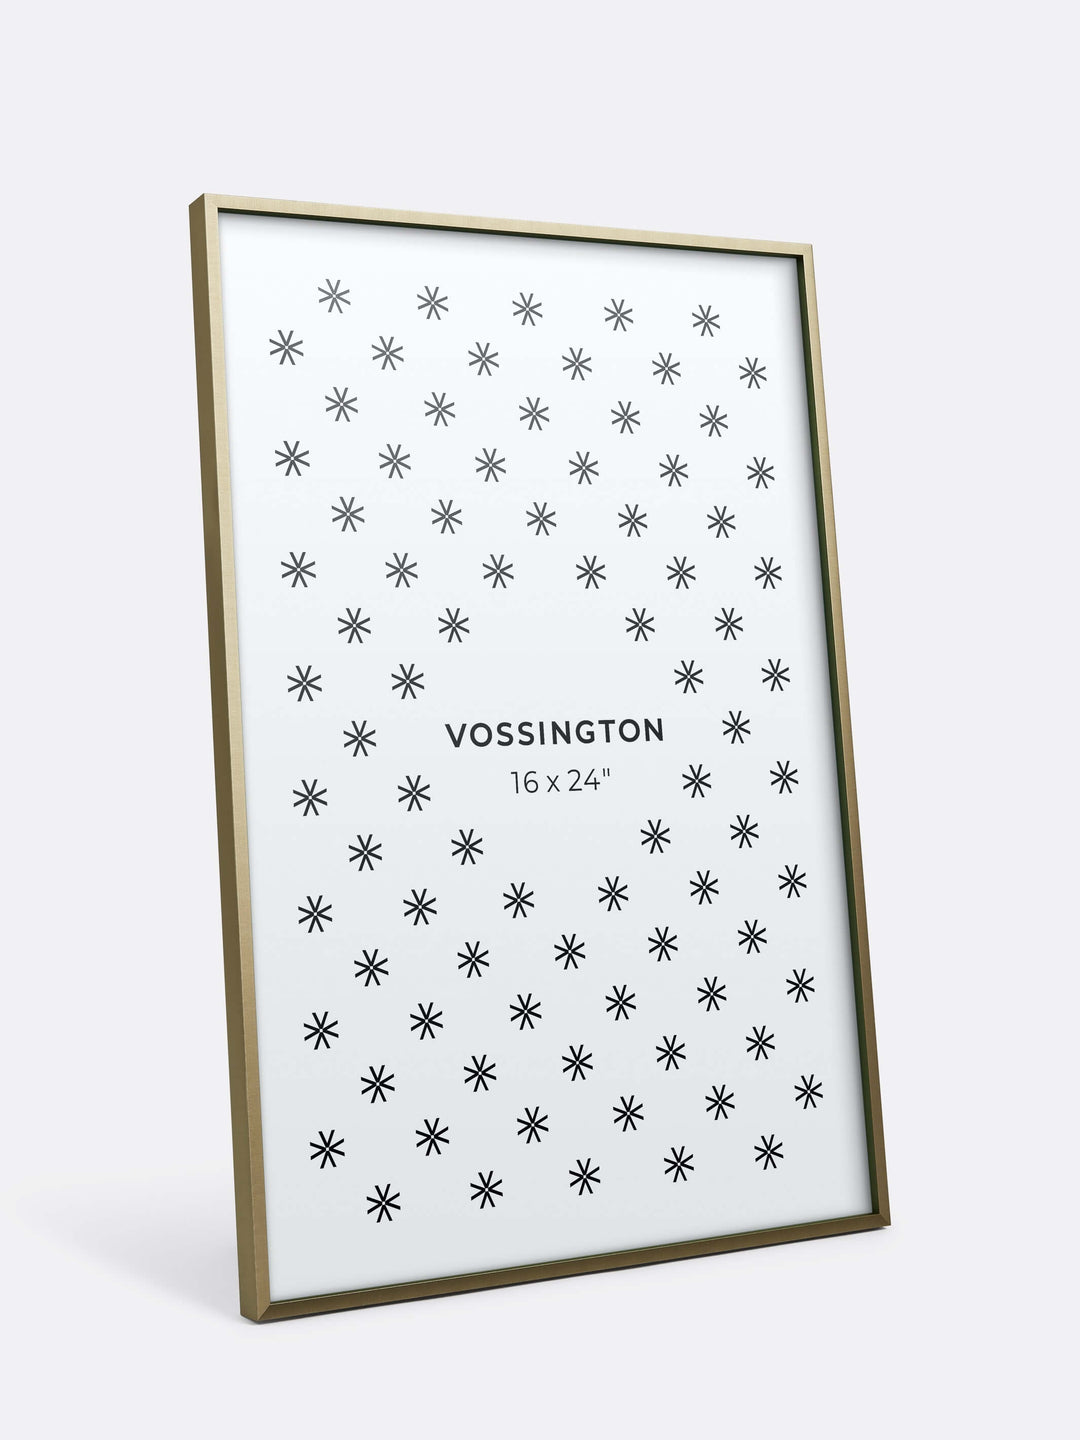 16x24 Frame - Exclusive Gold Poster Frame From Vossington